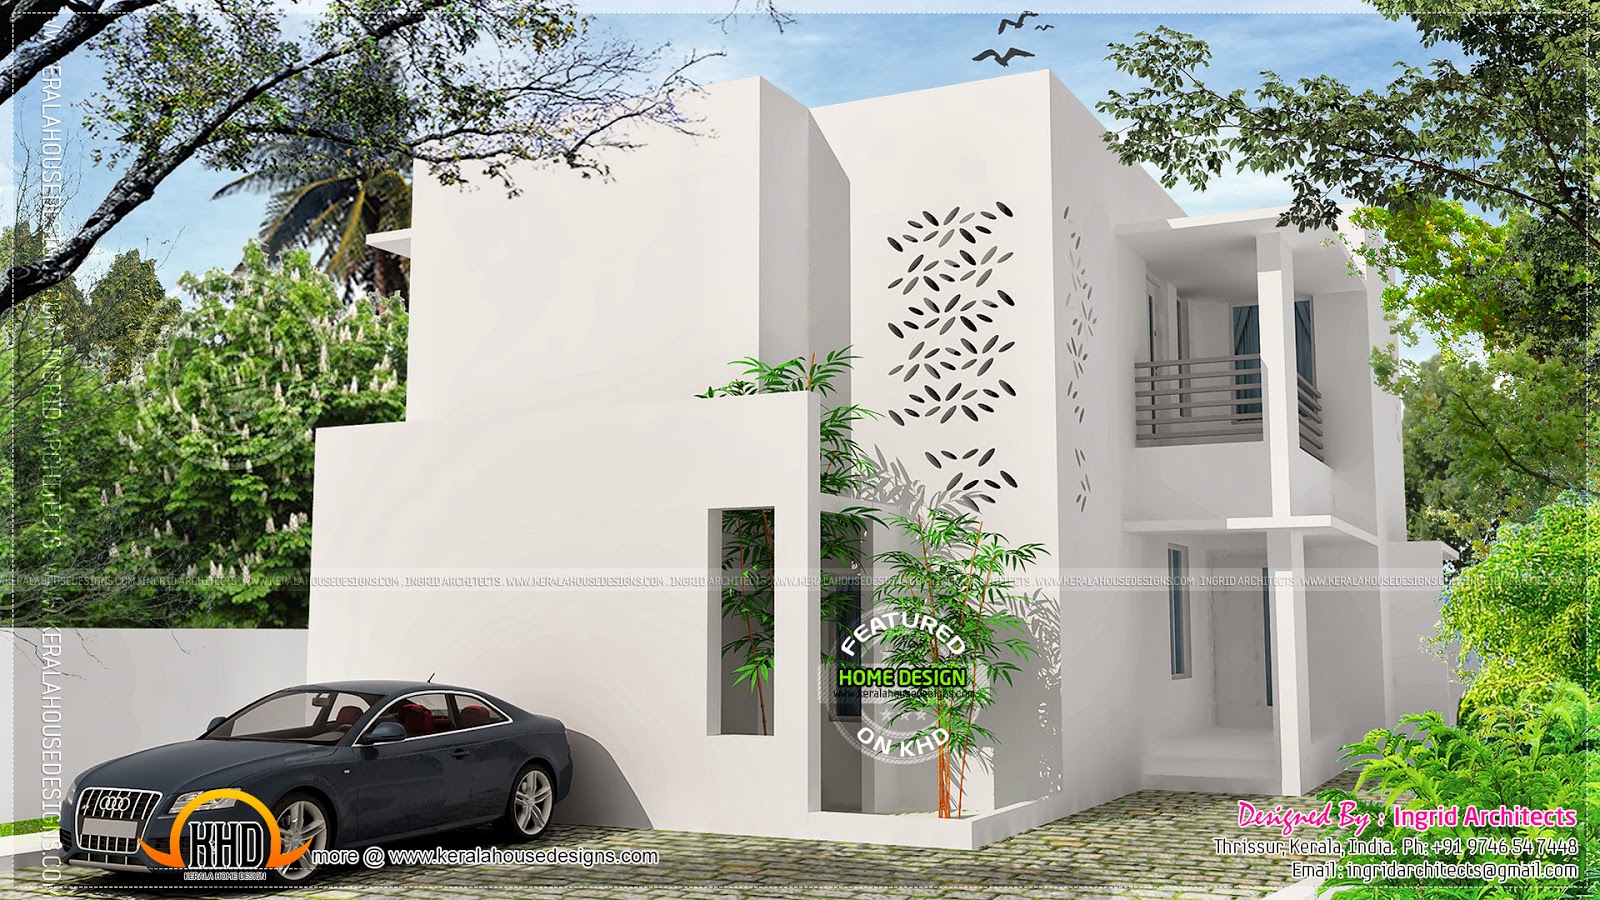  Simple  contemporary  modern  house  Kerala home  design and 